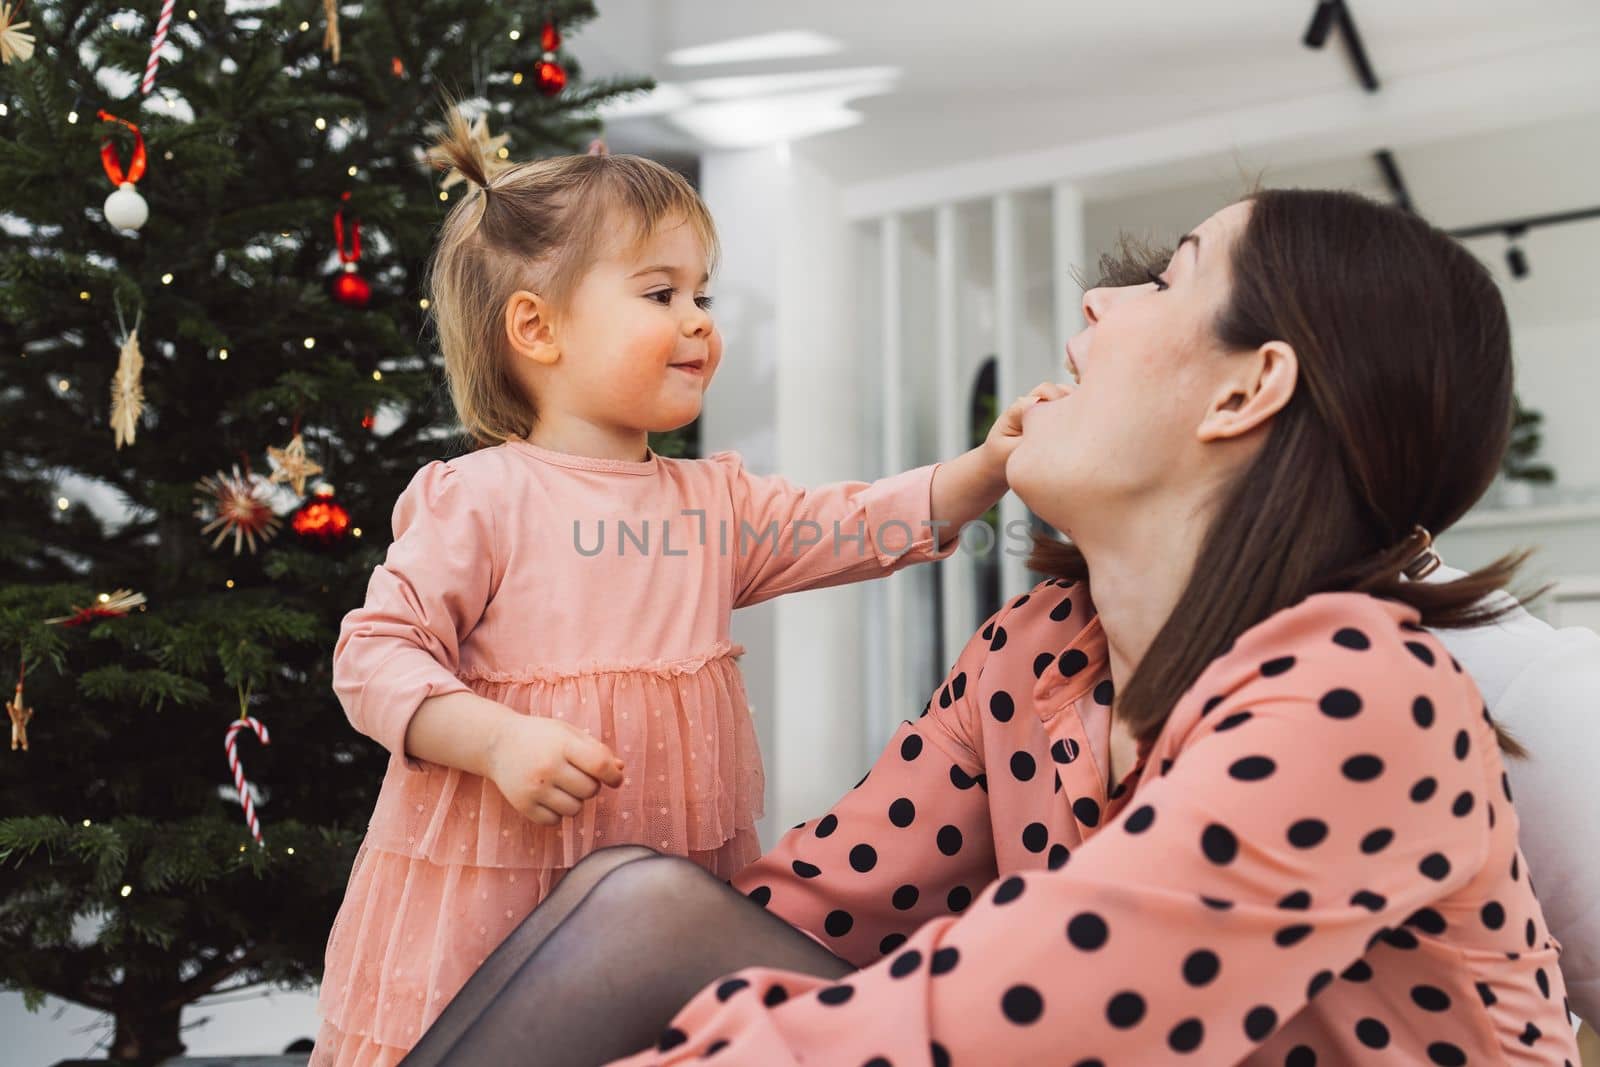 Young caucasian woman, mom, spending time with her toddler, young girl wearing a pink dress matching her mom. Mom and daughter decorating for Christmas together having fun. Mom holding a smiling little girl in her arms.